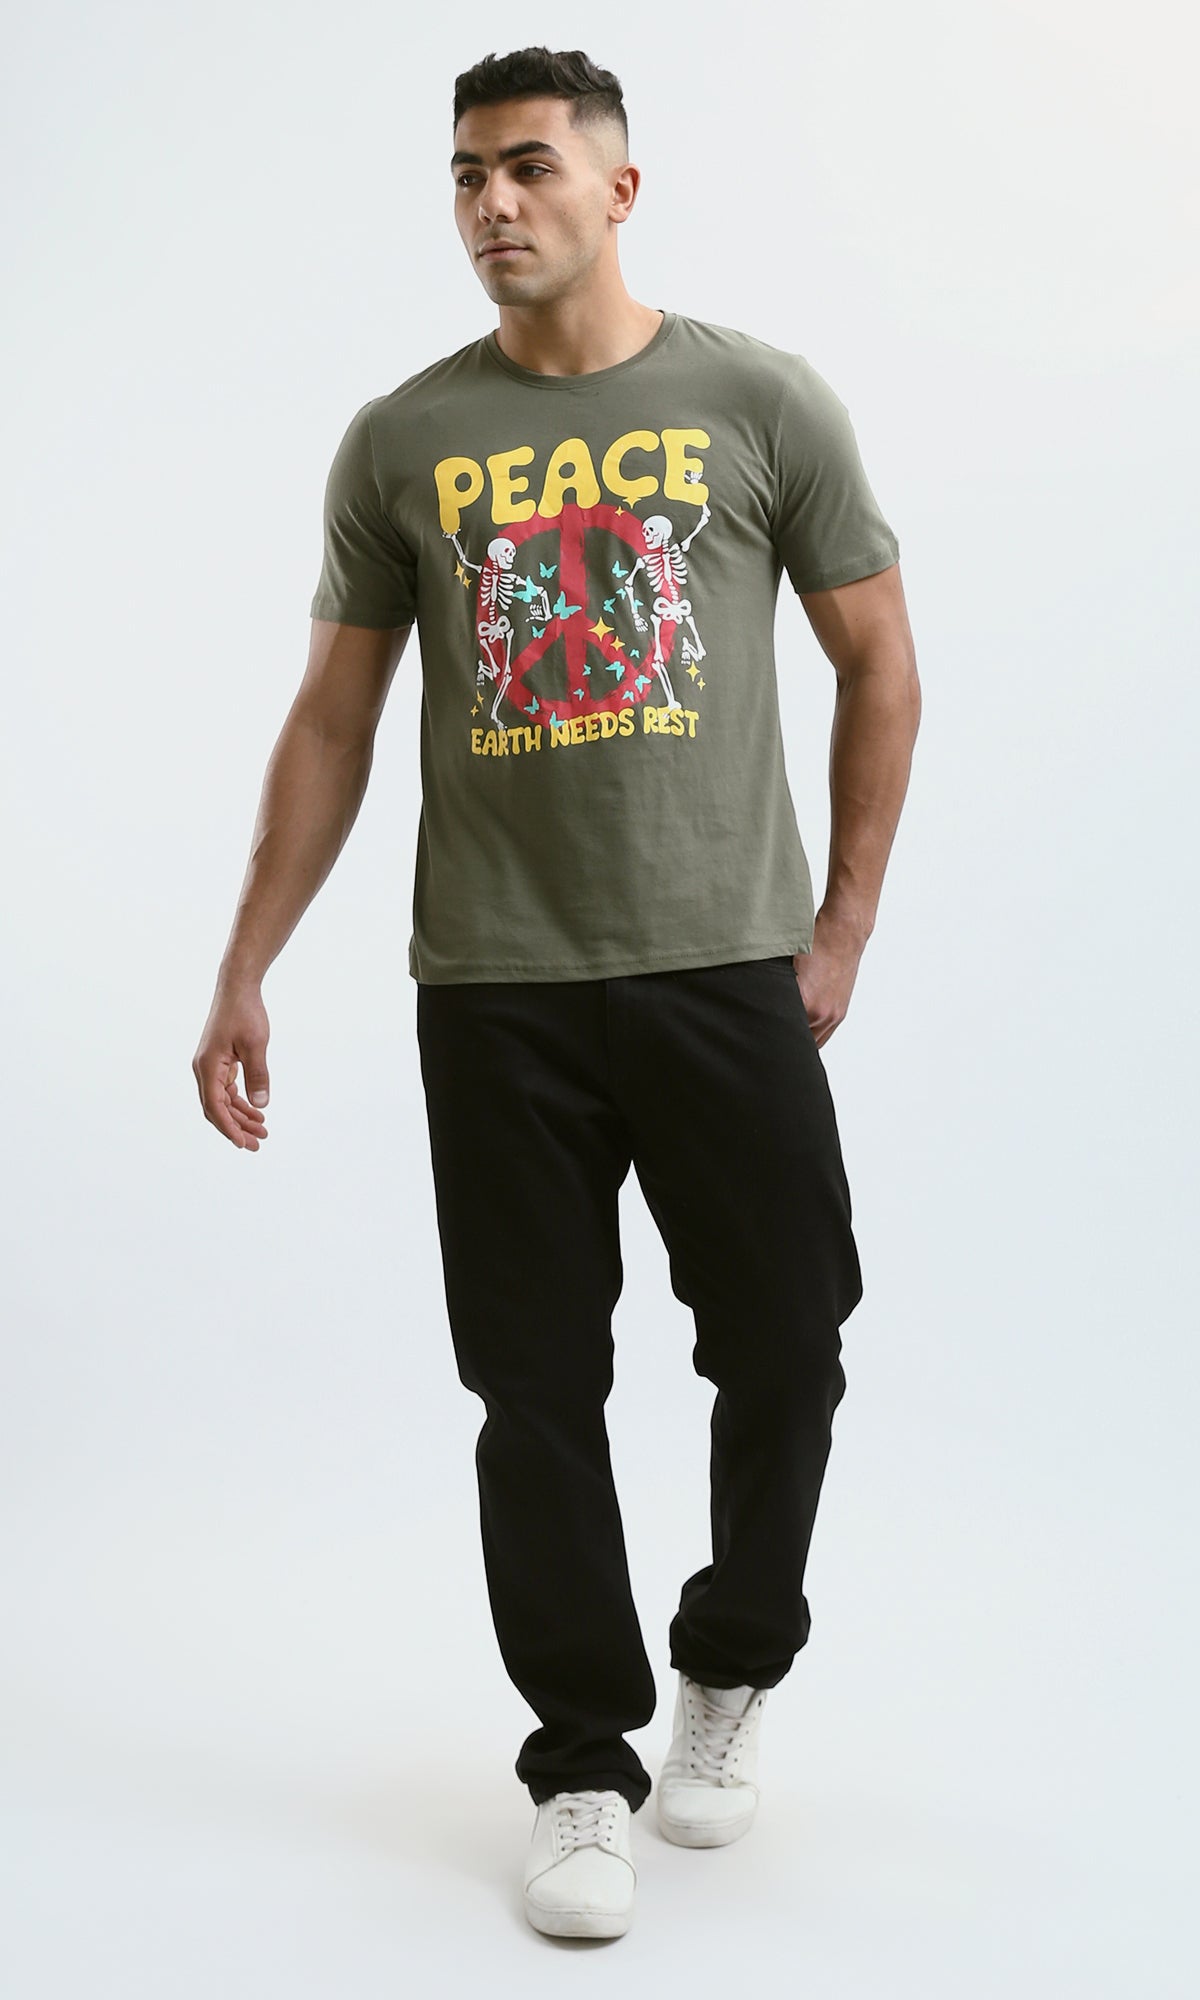 O182899 Olive Slip On Tee With Front Print "Peace" 